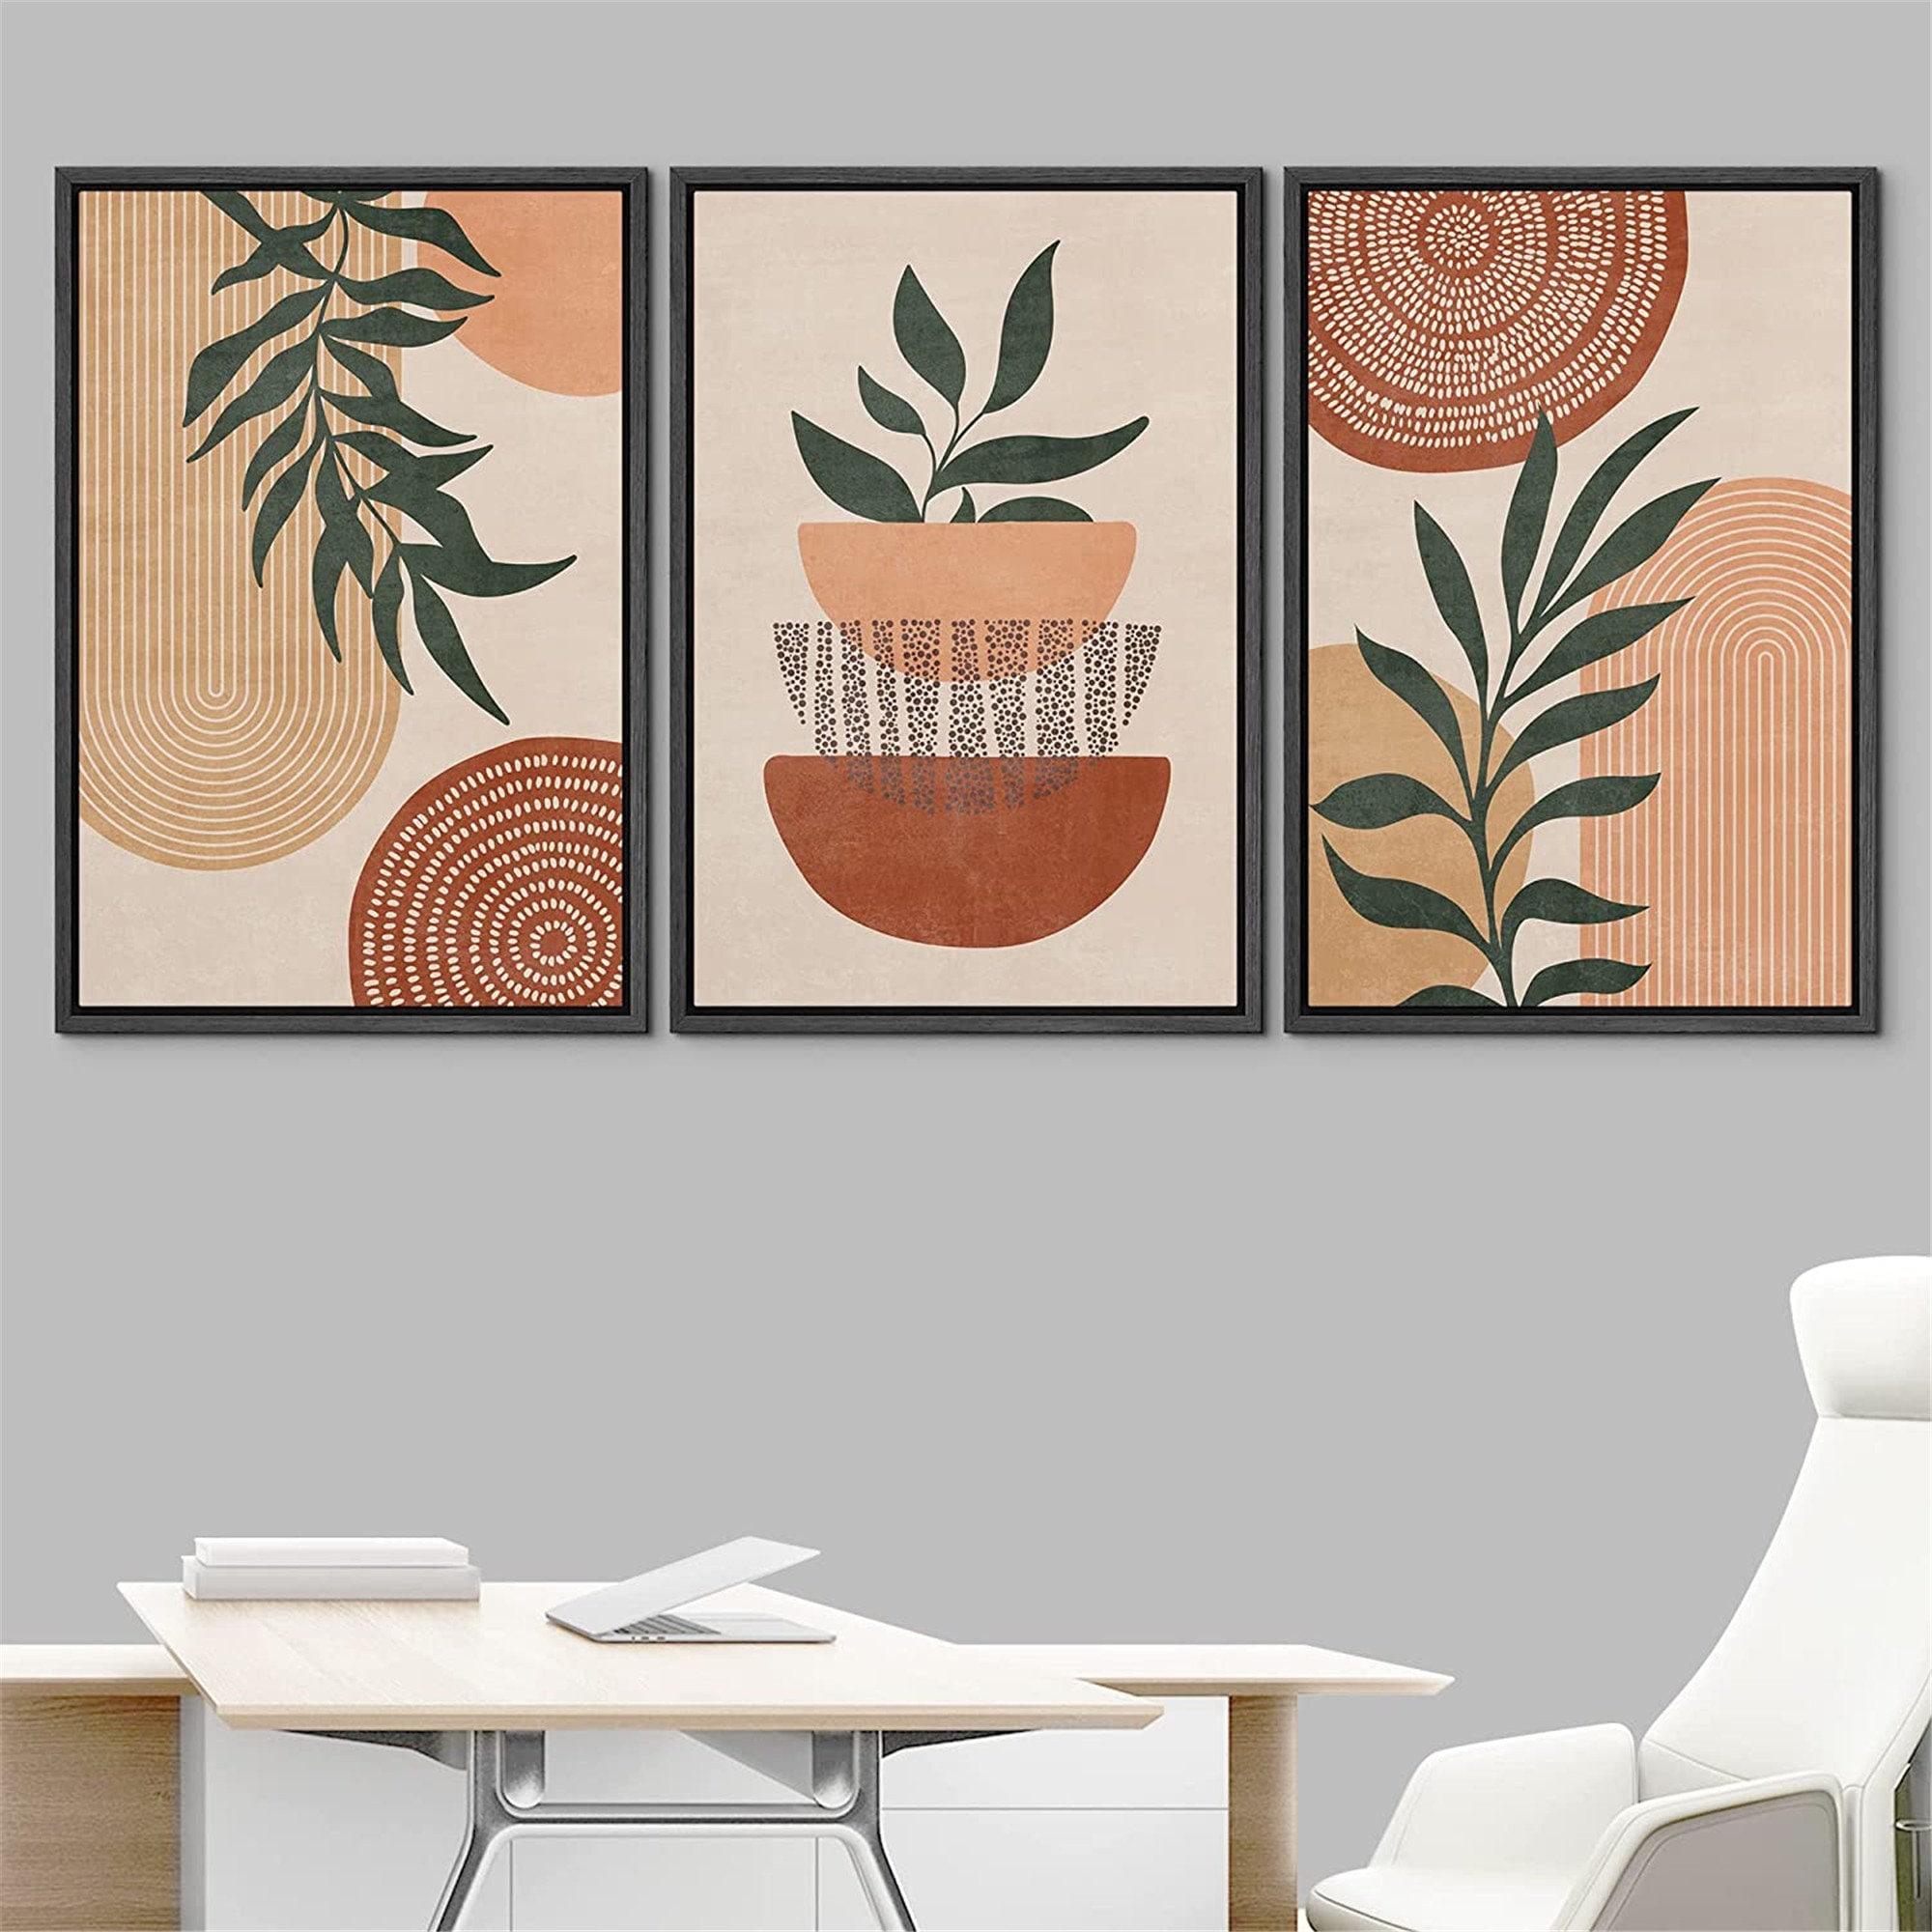  HABEN ARTWORK Vintage Earthenware Clay pots Print On Canvas  Wall Artwork Modern Photography Home Decor Unique Pattern Stretched and  Framed 3 Piece: Posters & Prints